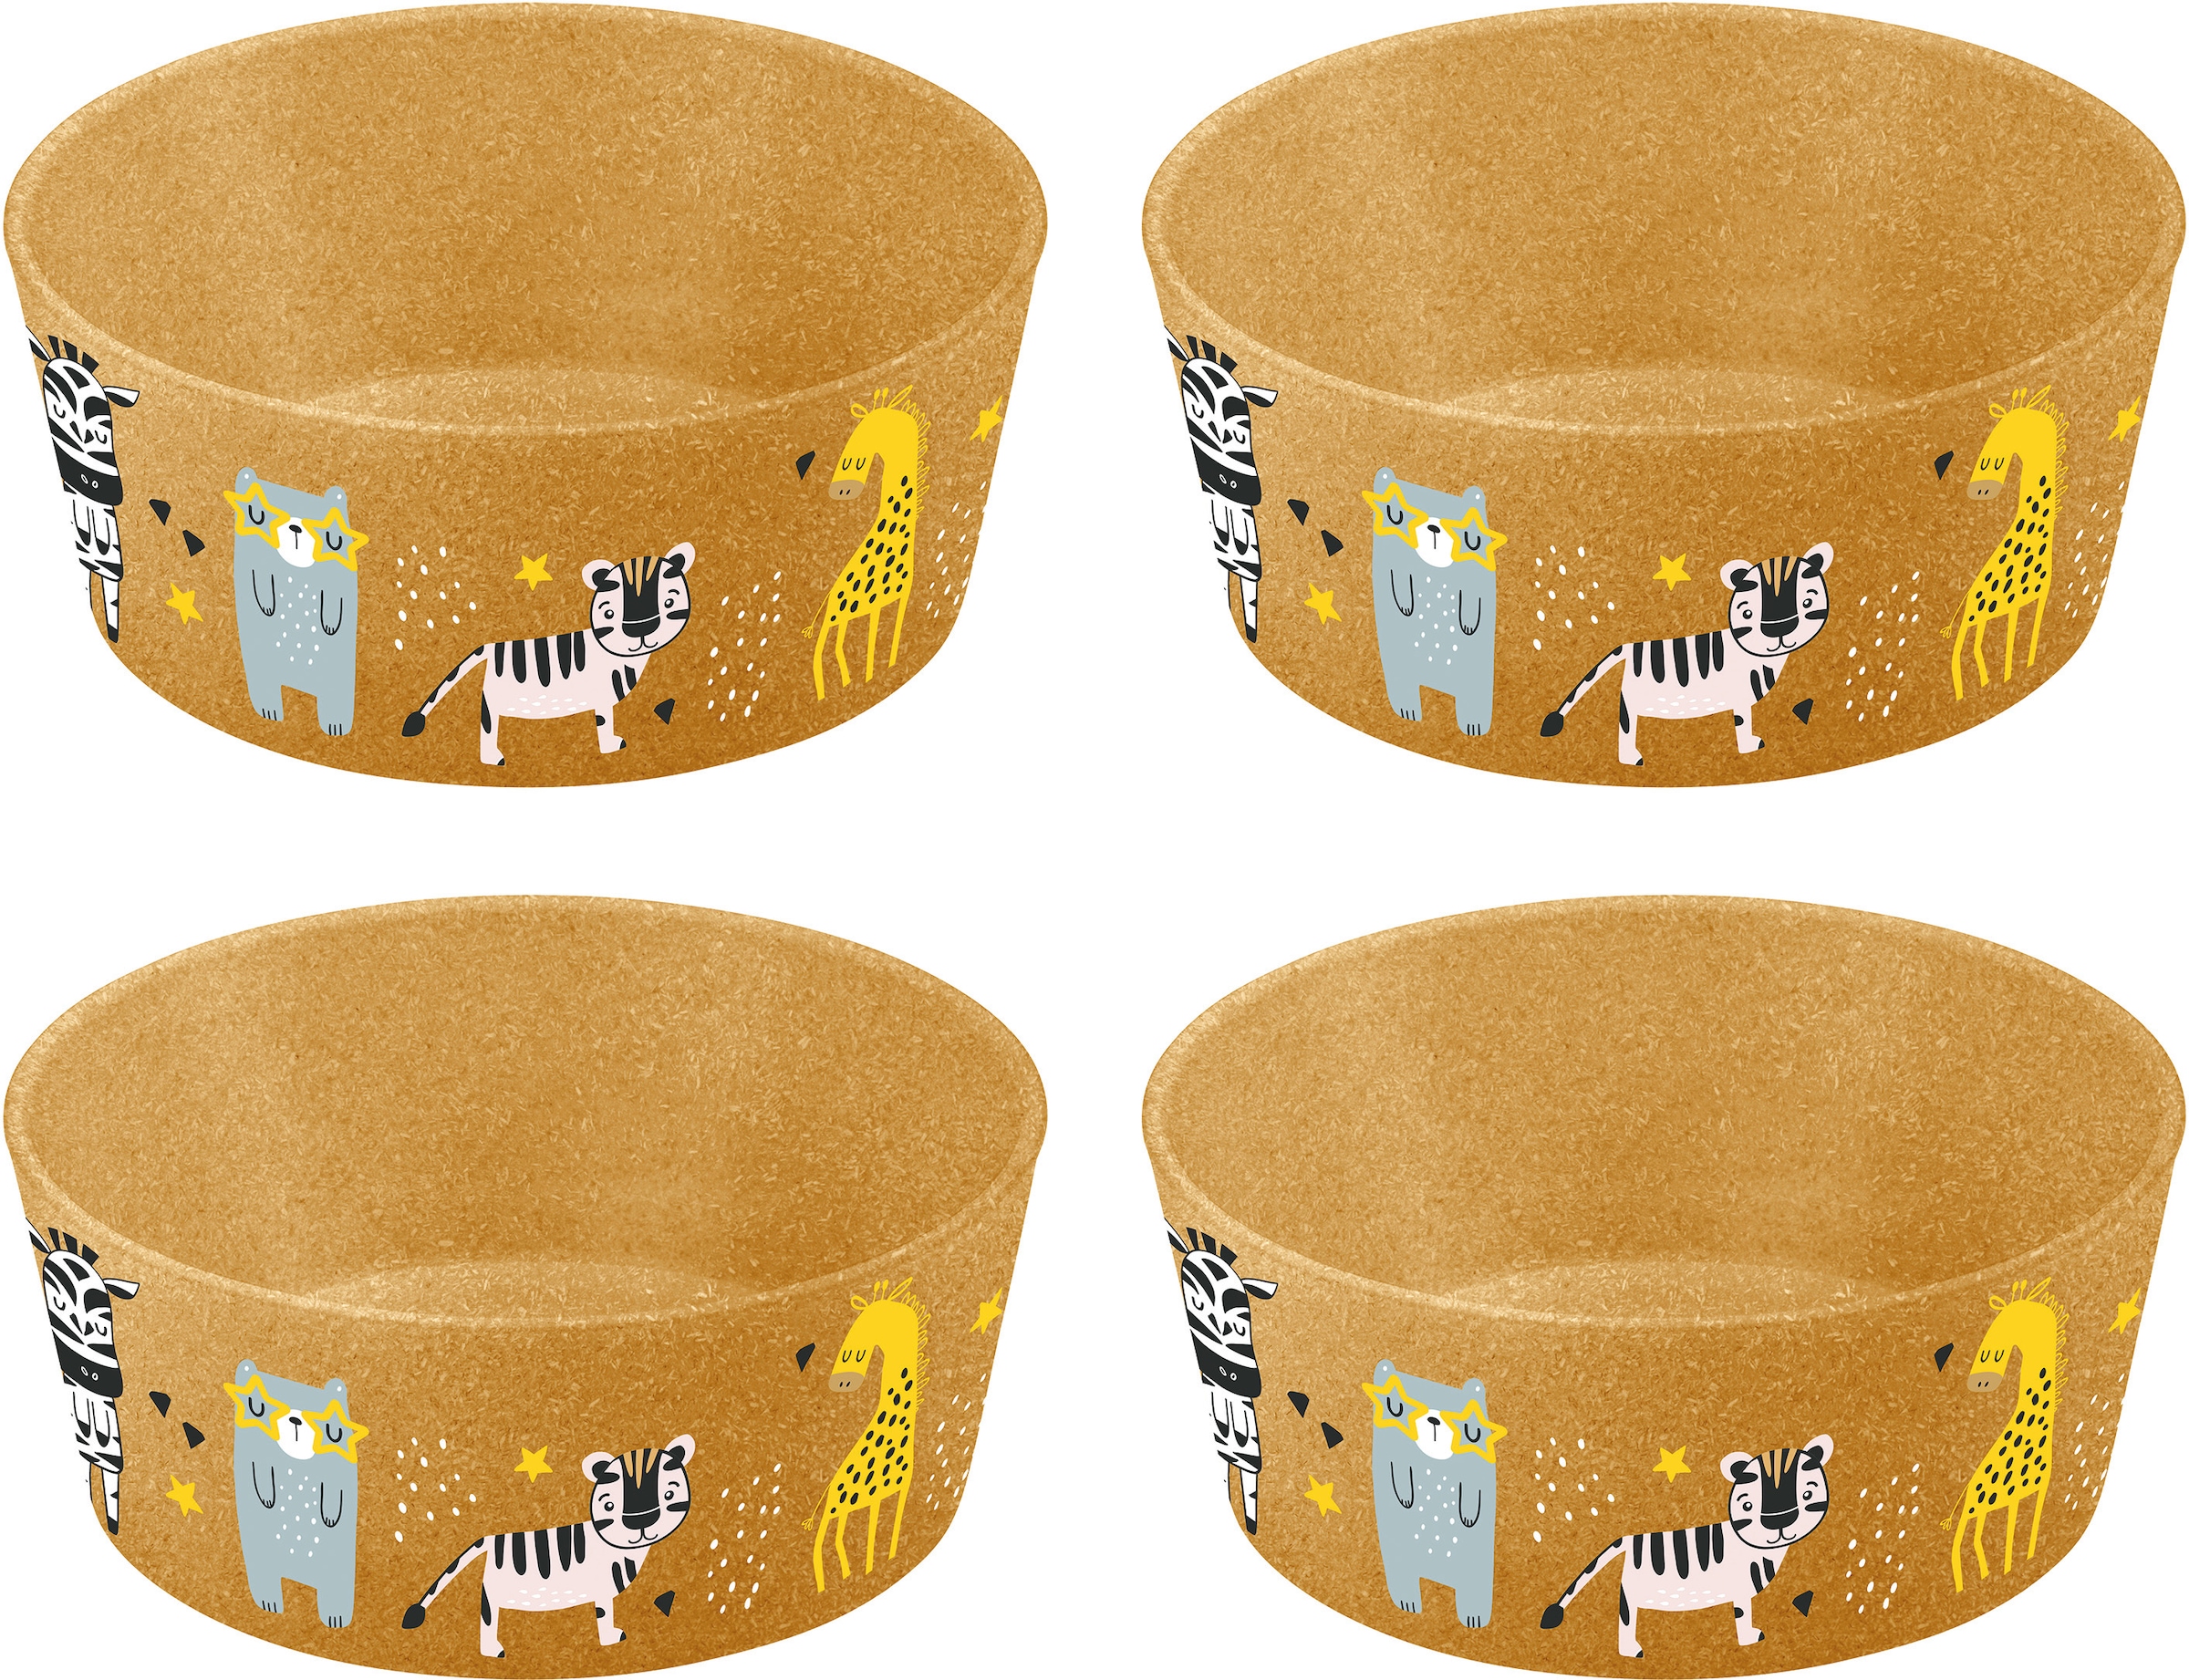 Kinderschale »CONNECT BOWL ZOO«, 4 tlg., aus Kunststoff, 100% recycelbar, 100% made in...